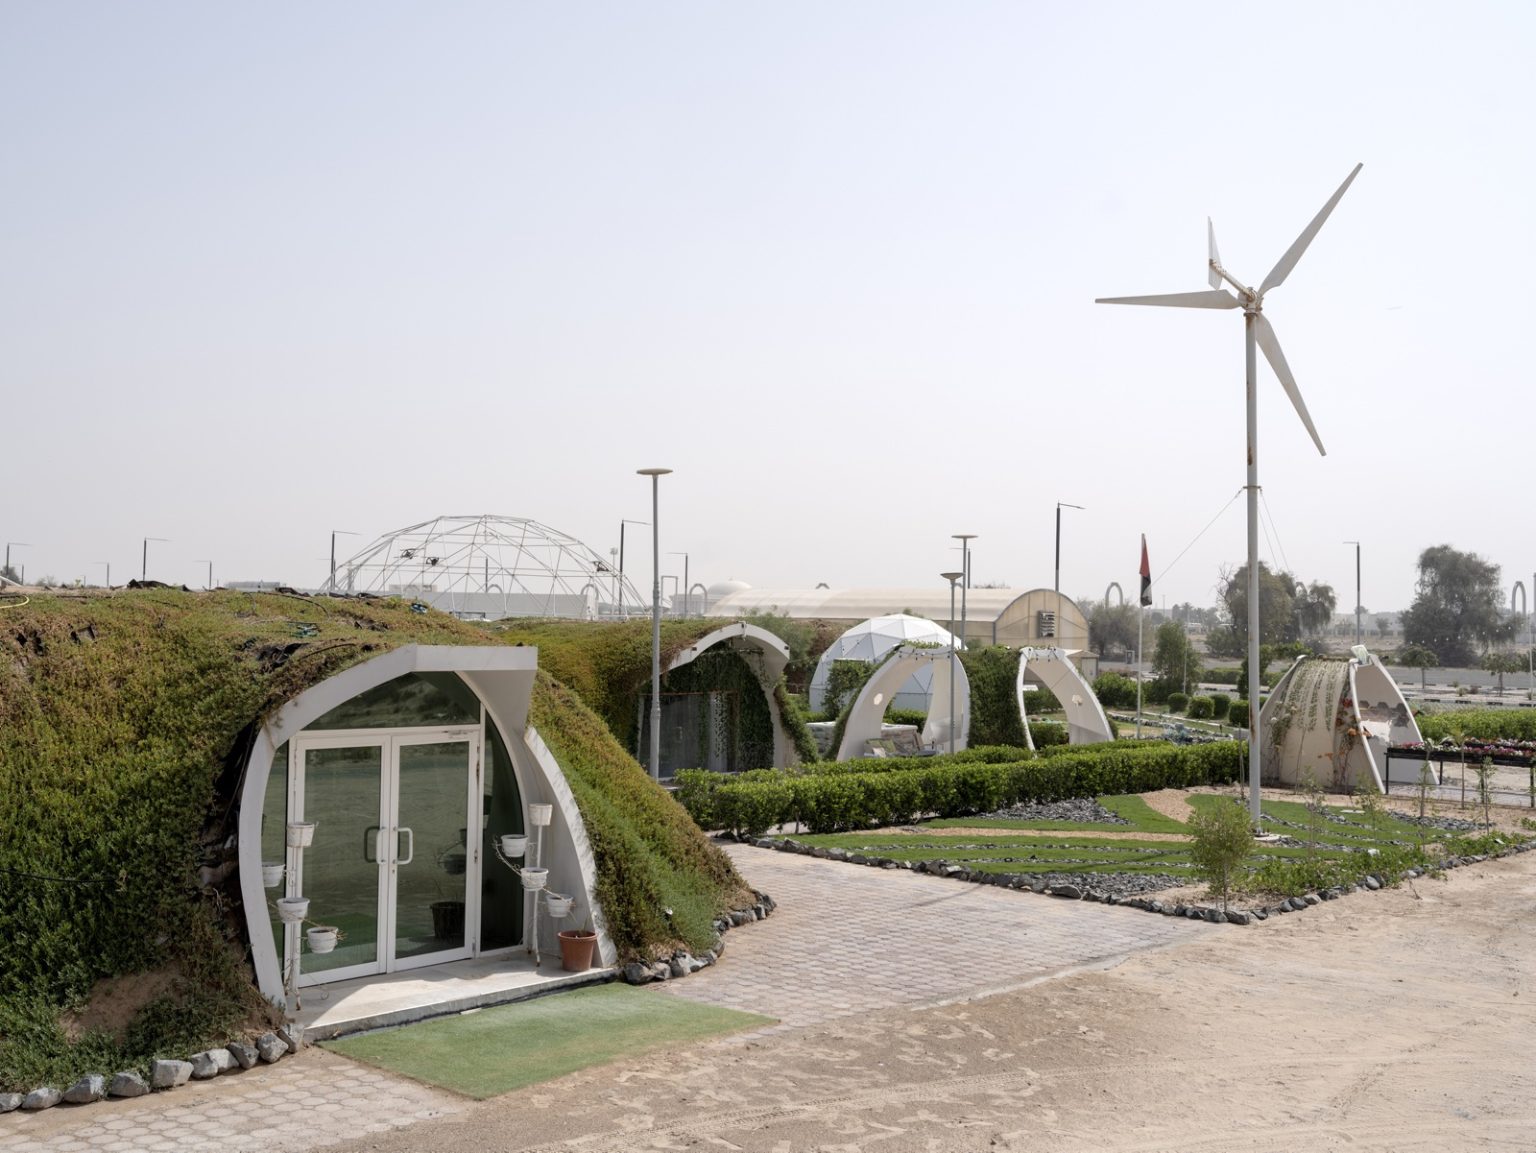 UAE, Green Dunes, 2022.
The Sharjah Research Technology and Innovation park is an ideas factory. Their CEO, Hussain Al Mahmoudi, has highlighted food security for UAE as one of the core motivations behind such ideas. In the centres sandy grounds. researchers have designed a huddle of indoor farms that can grow lettuce, vegetables and fruit. 

Made from a composite material that keeps out the blistering heat, the dome structures have the look of farming on Mars. This technology has been sold to other vertical farms in UAE. 


Emirati Arabi Uniti, Dune verdi, 2022.
Il parco di ricerca, tecnologia e innovazione di Sharjah è una fabbrica di idee. Il suo amministratore delegato, Hussain Al Mahmoudi, ha sottolineato che la sicurezza alimentare degli Emirati Arabi Uniti è una delle motivazioni principali alla base di queste idee. Nel terreno sabbioso del centro, i ricercatori hanno progettato un gruppo di fattorie al coperto in grado di coltivare lattuga, verdure e frutta. 

Realizzate con un materiale composito che tiene lontano il caldo torrido, le strutture a cupola hanno l'aspetto di un'agricoltura su Marte. Questa tecnologia è stata venduta ad altre fattorie verticali negli Emirati Arabi Uniti.